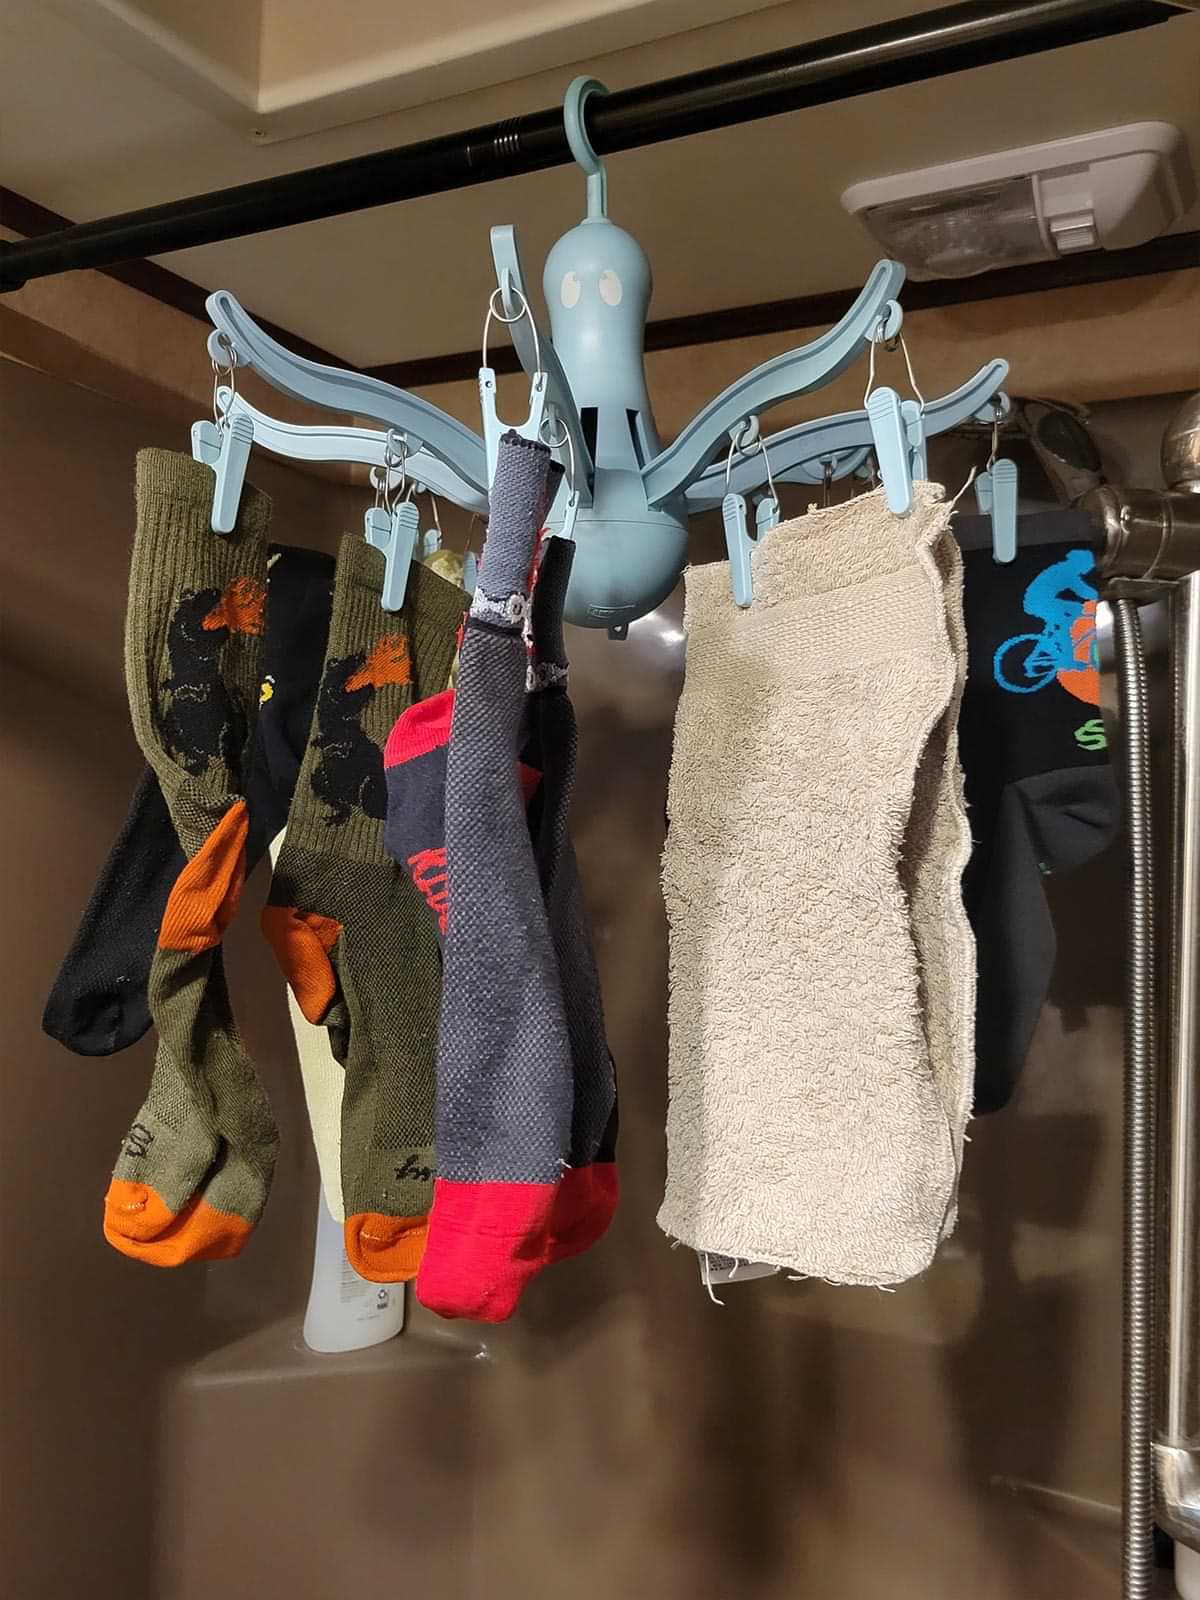 socks and towels are clipped to a hanging carousel drying device held by shower rod